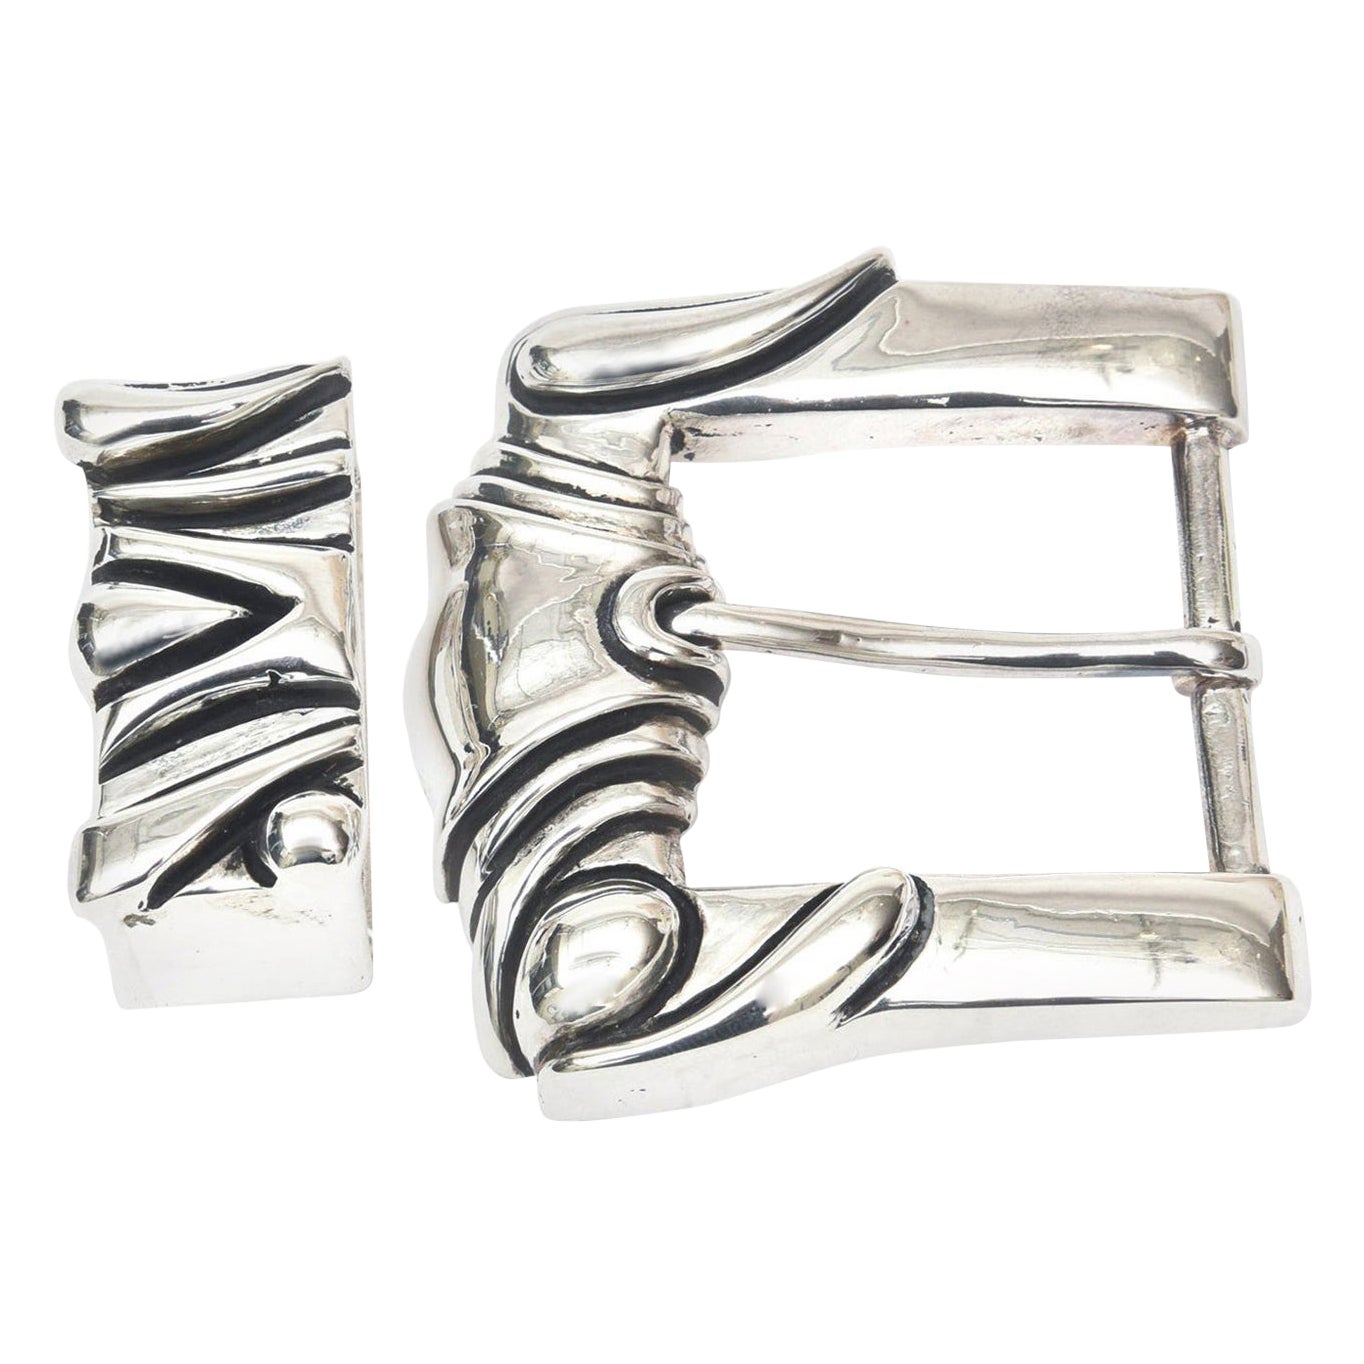 Are Montana Silversmiths belt buckles real silver?